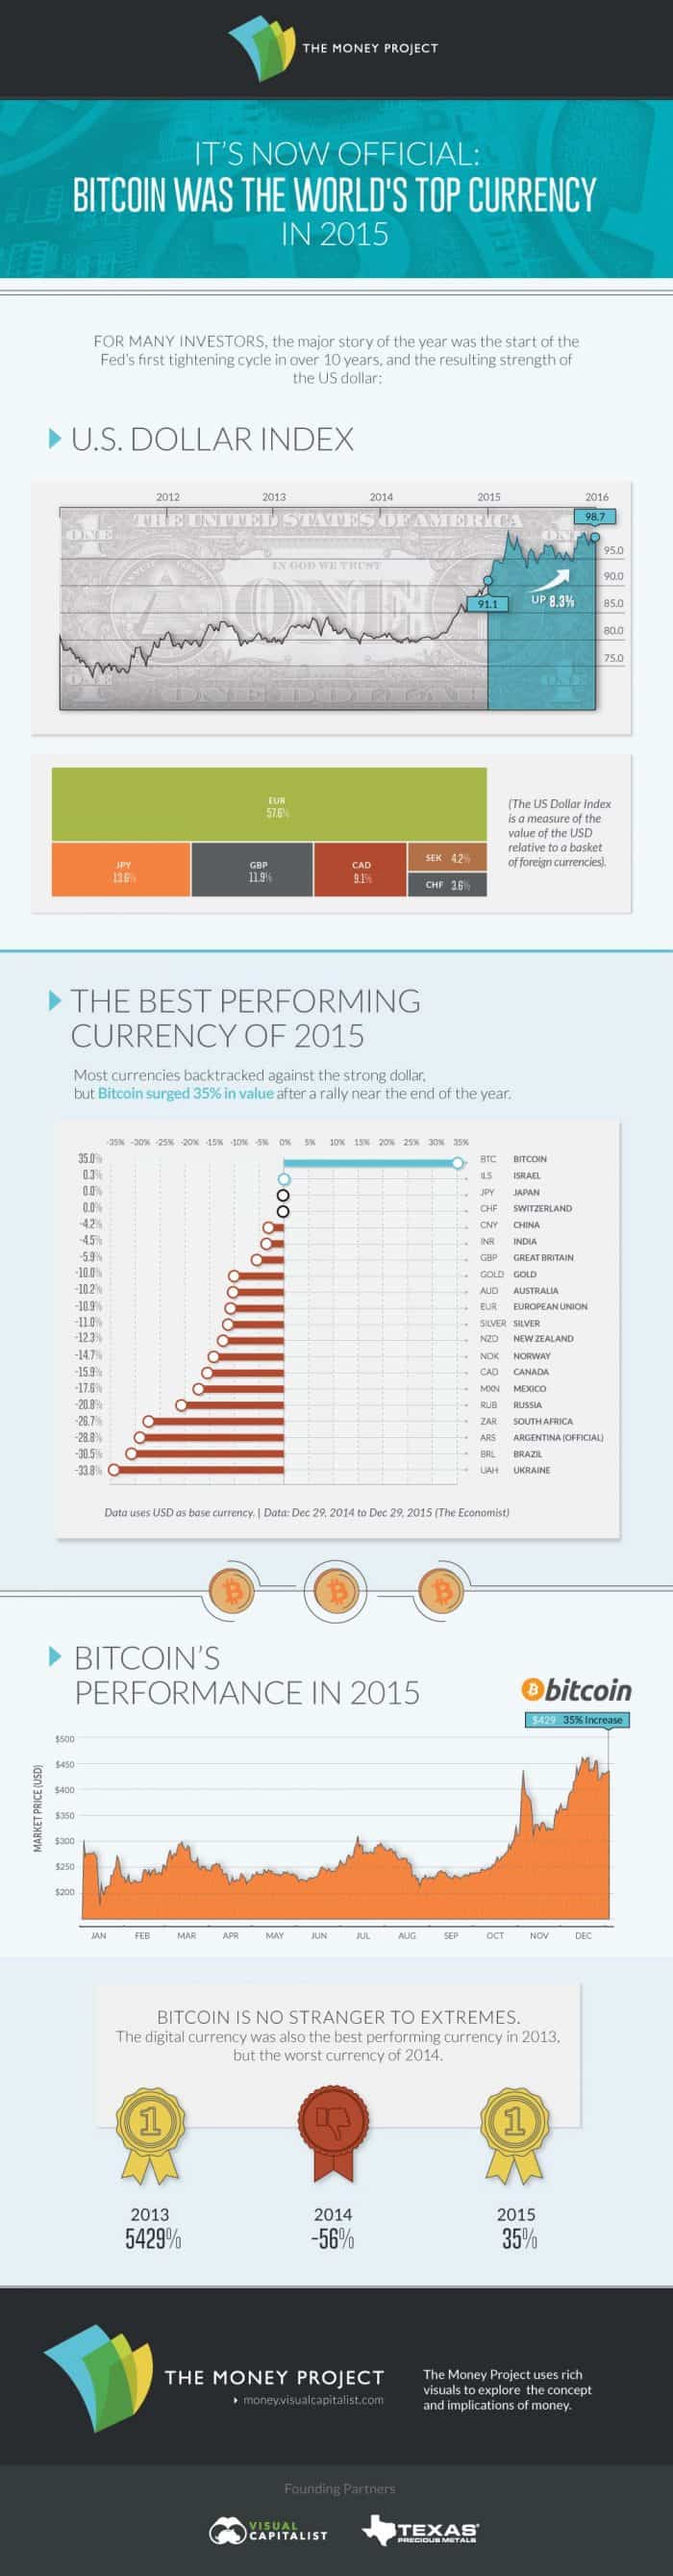 Bitcoin 2015’s Best Performing Currency Infographic